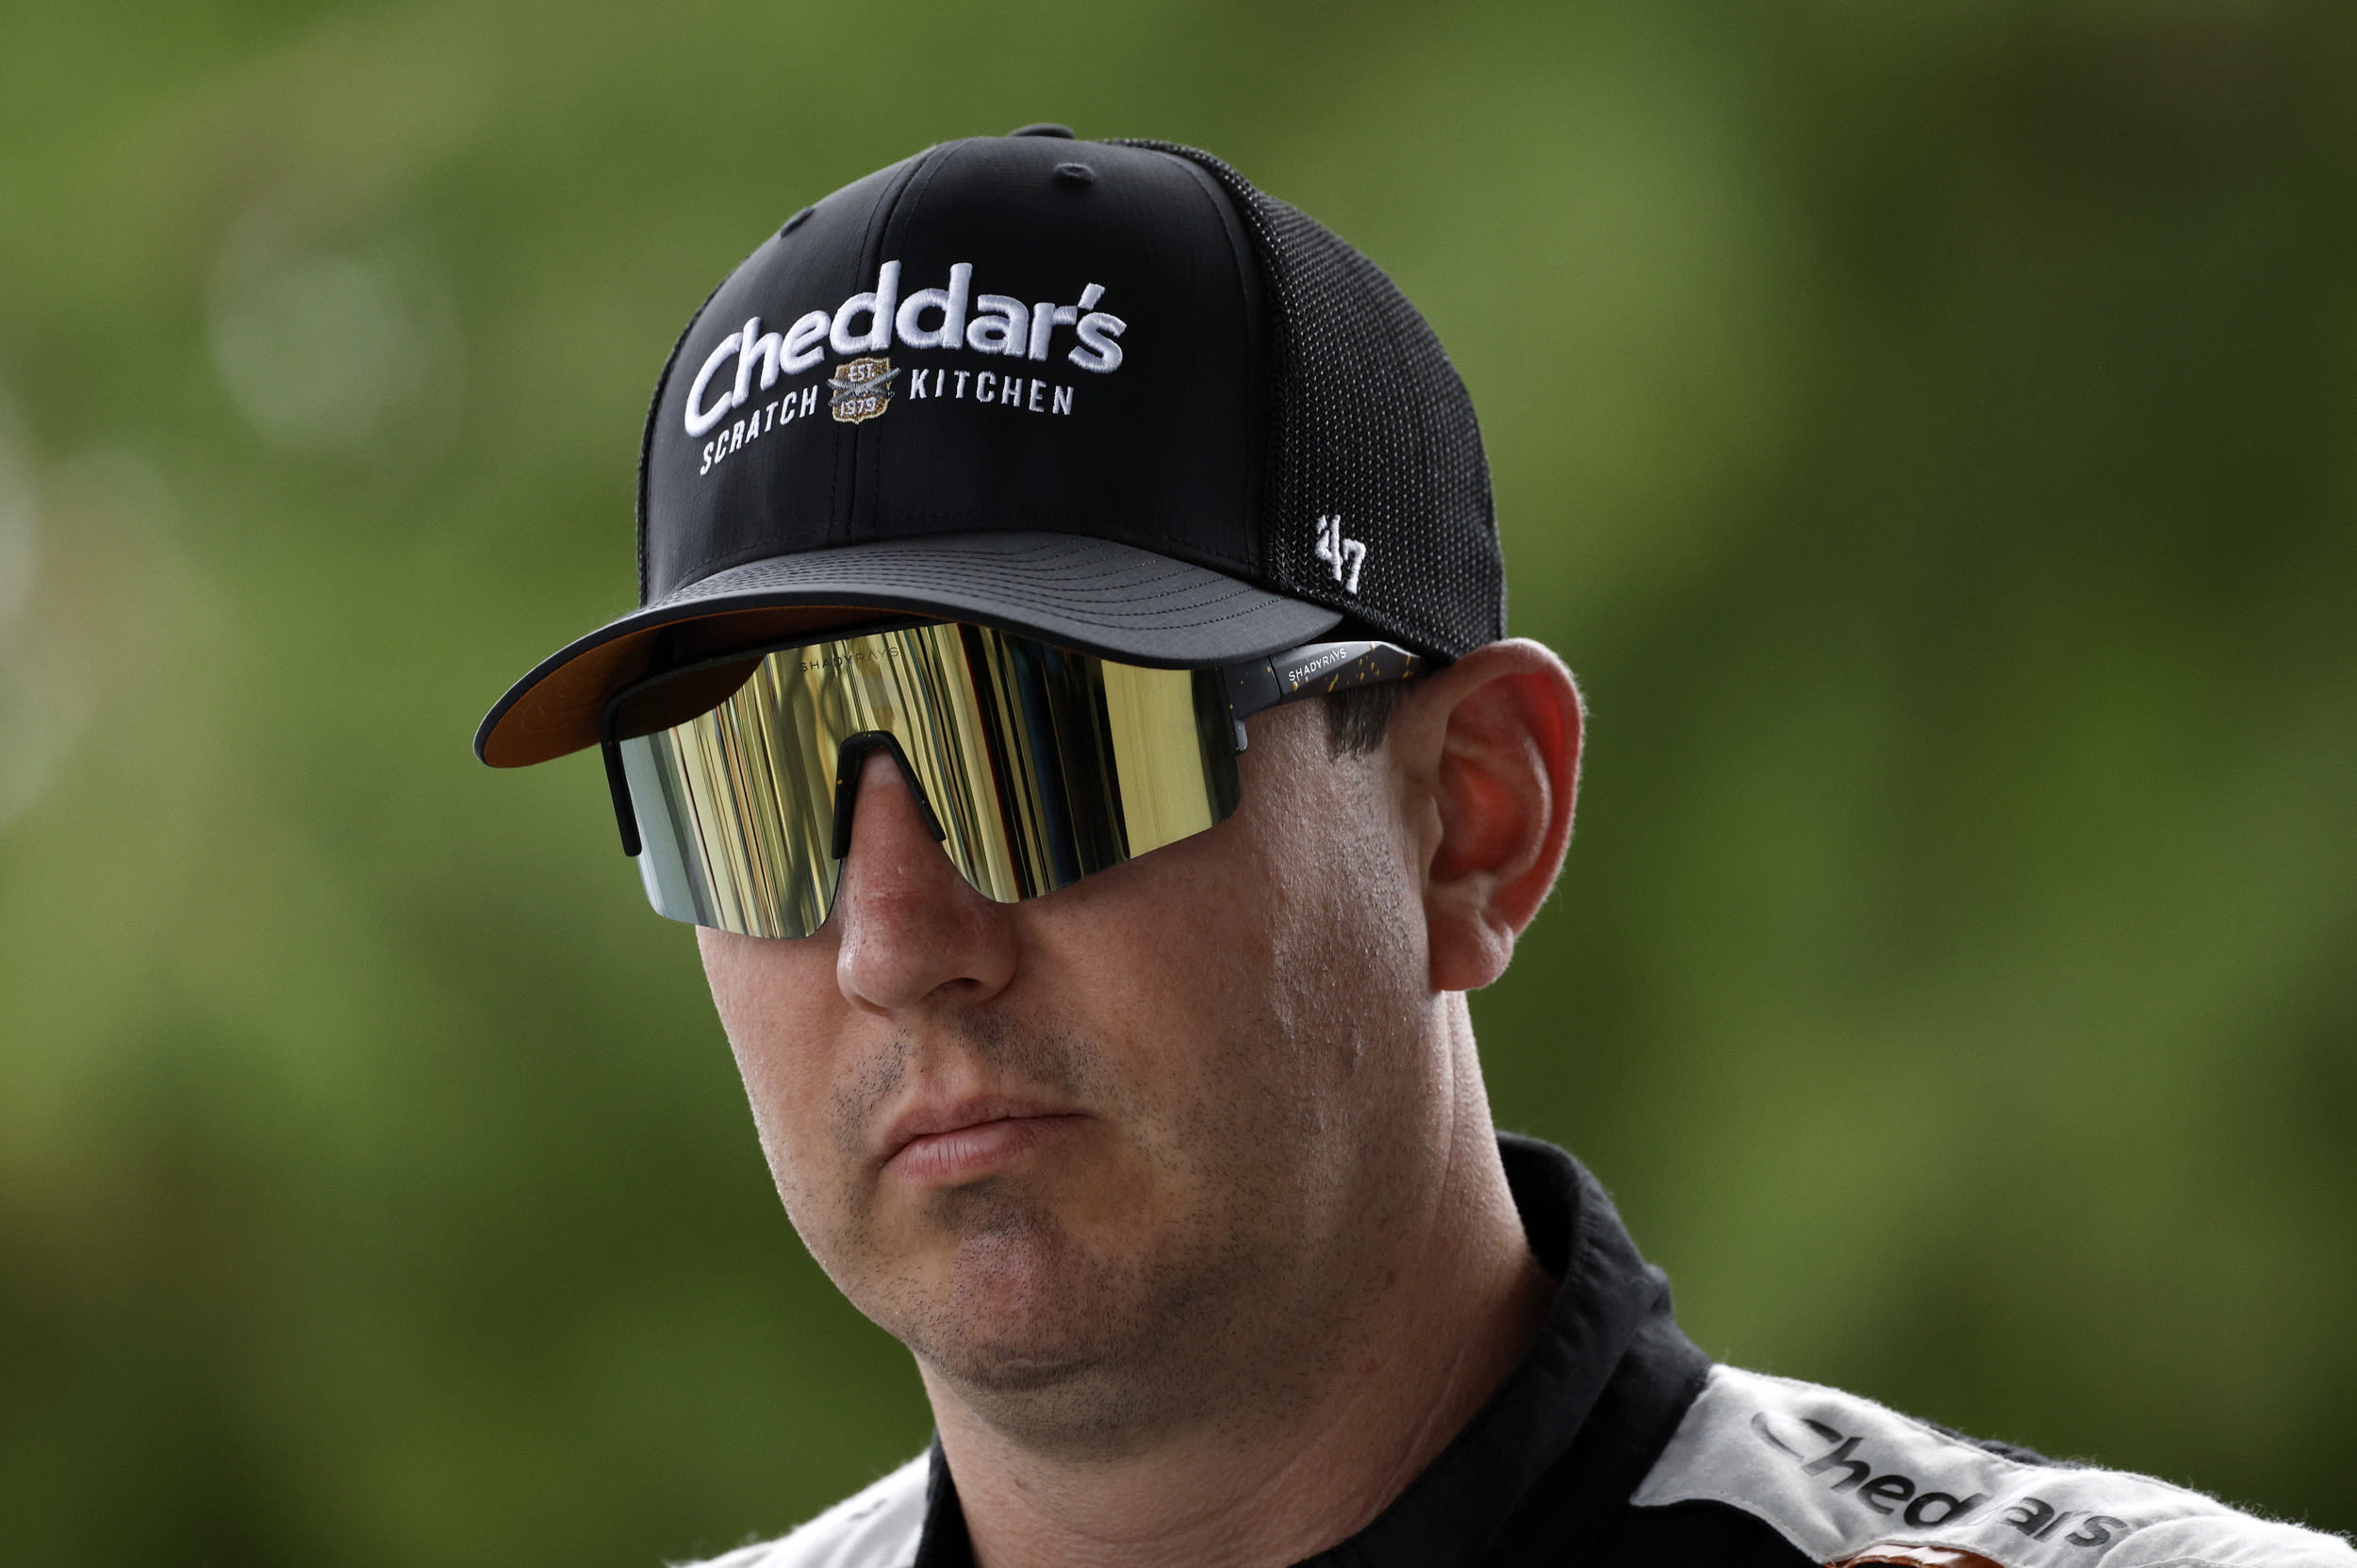 Kyle Busch Sends Message to Team After Disappointing Brickyard 400 Race